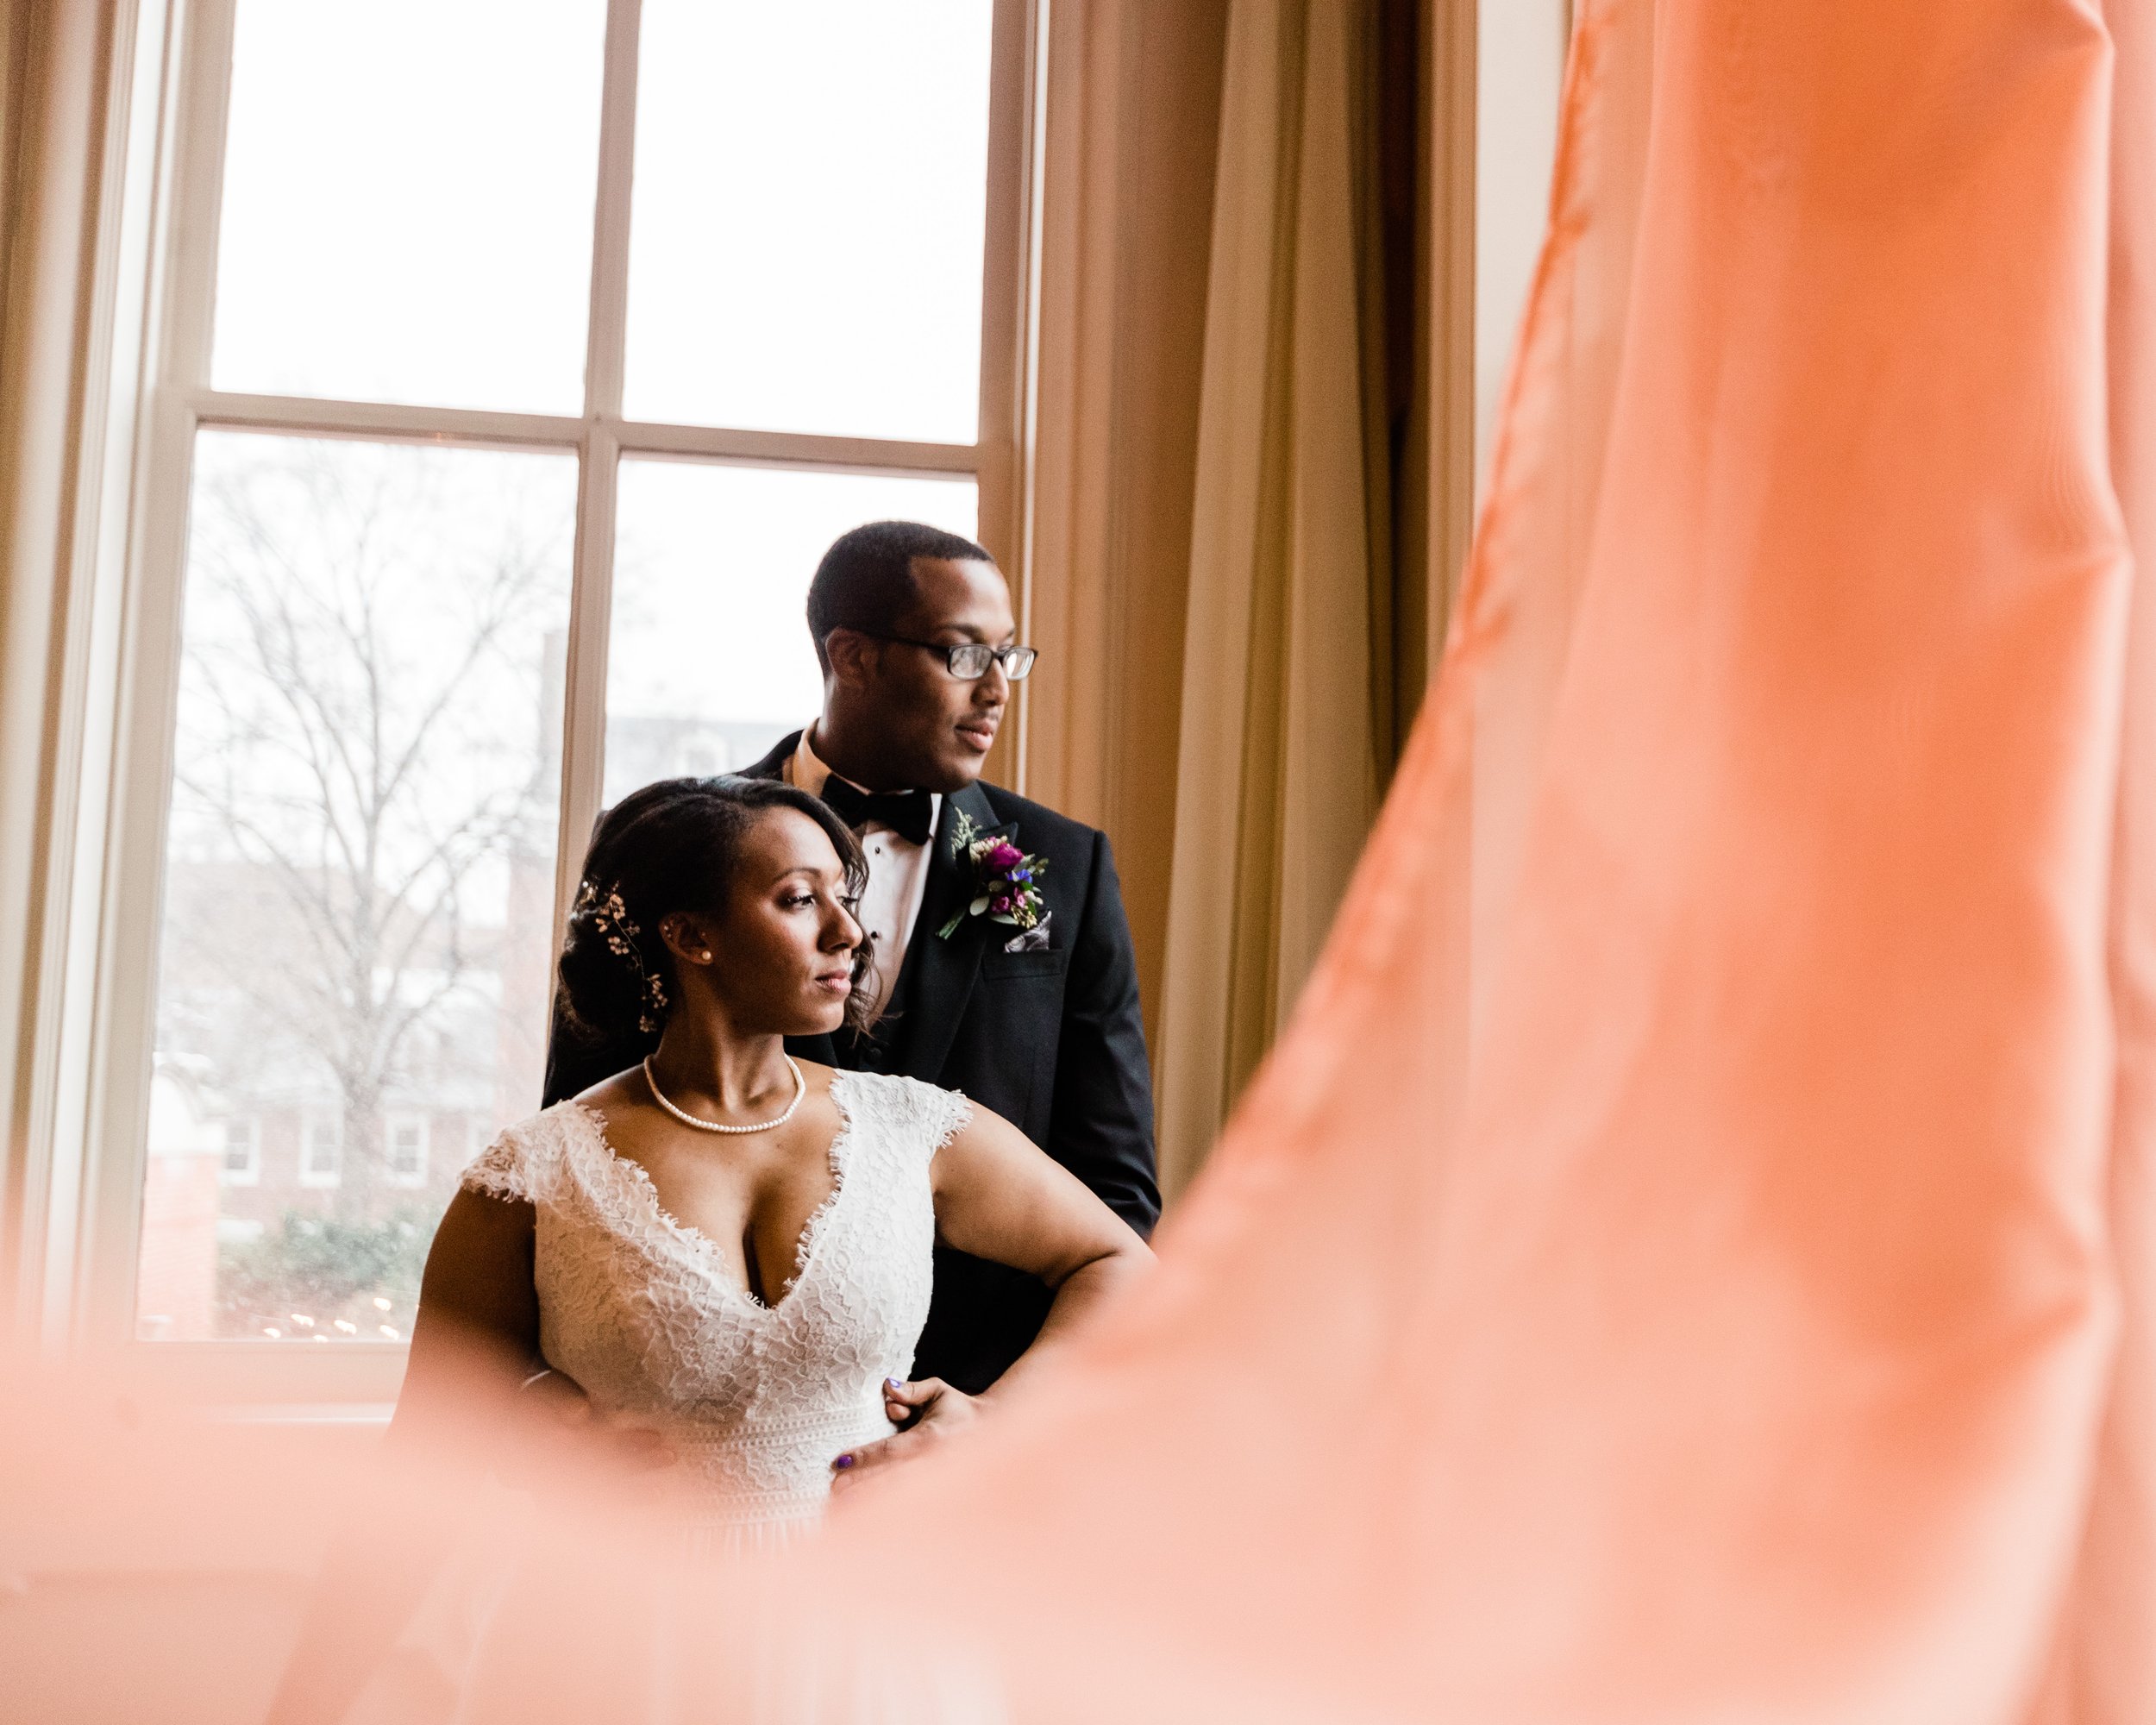 Snowy Winter Wedding at 1840's Plaza in Baltimore City Megapixels Media Photography-41.jpg